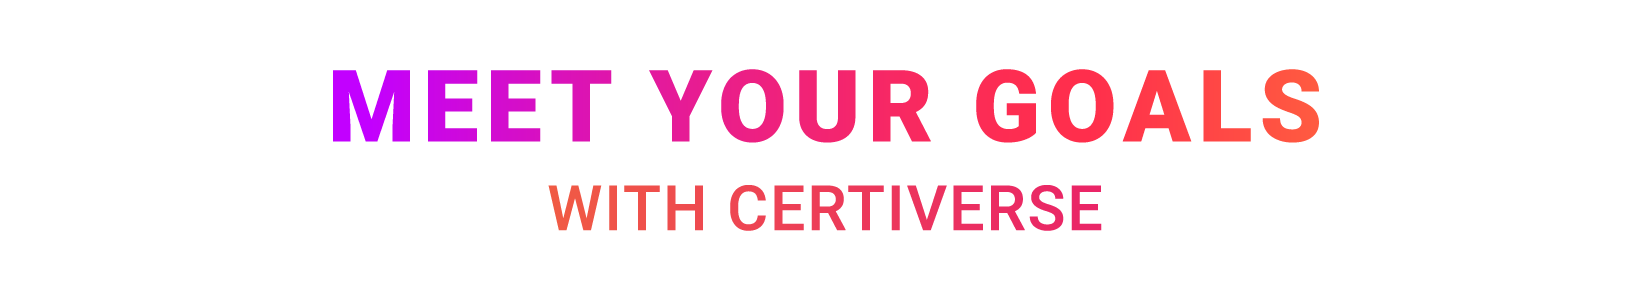 Meet-your-goals-with-certiverse